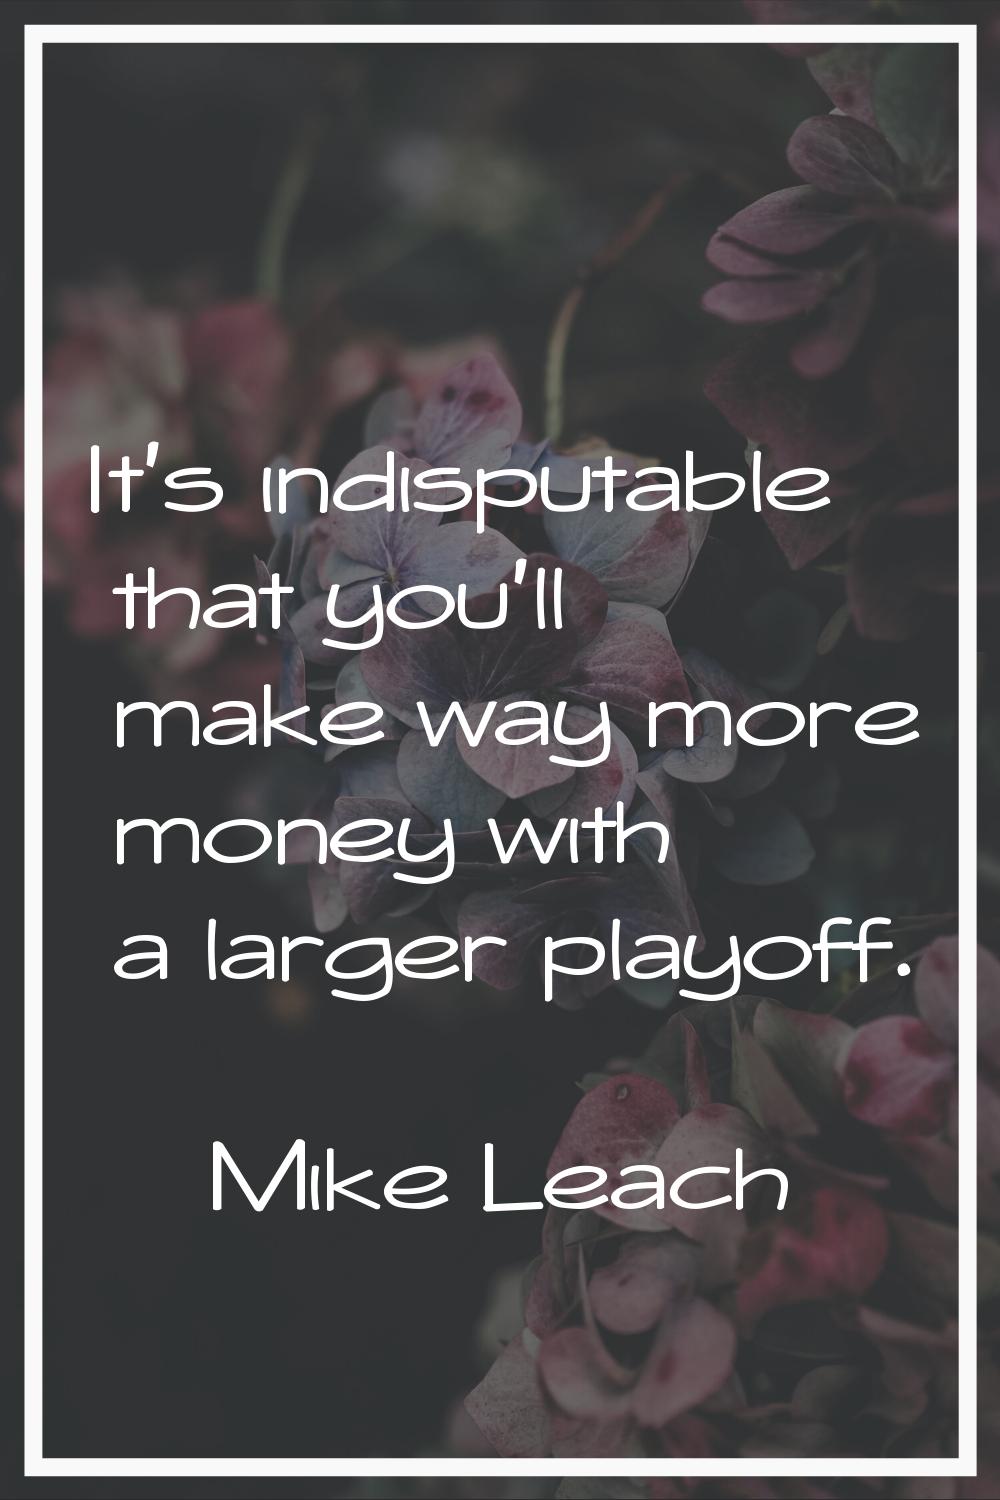 It's indisputable that you'll make way more money with a larger playoff.